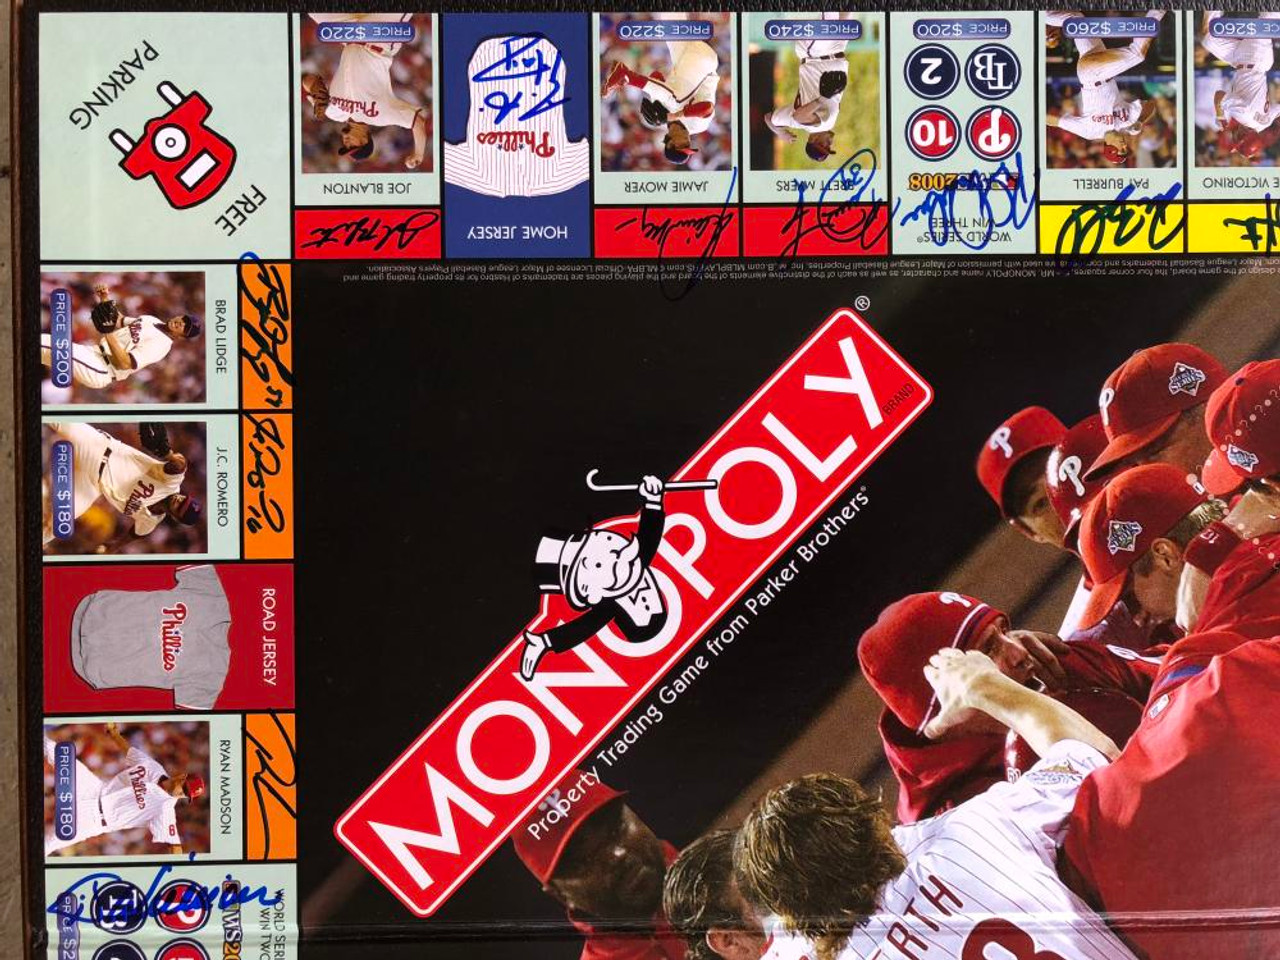 Monopoly: St. Louis Cardinals Collector's Edition